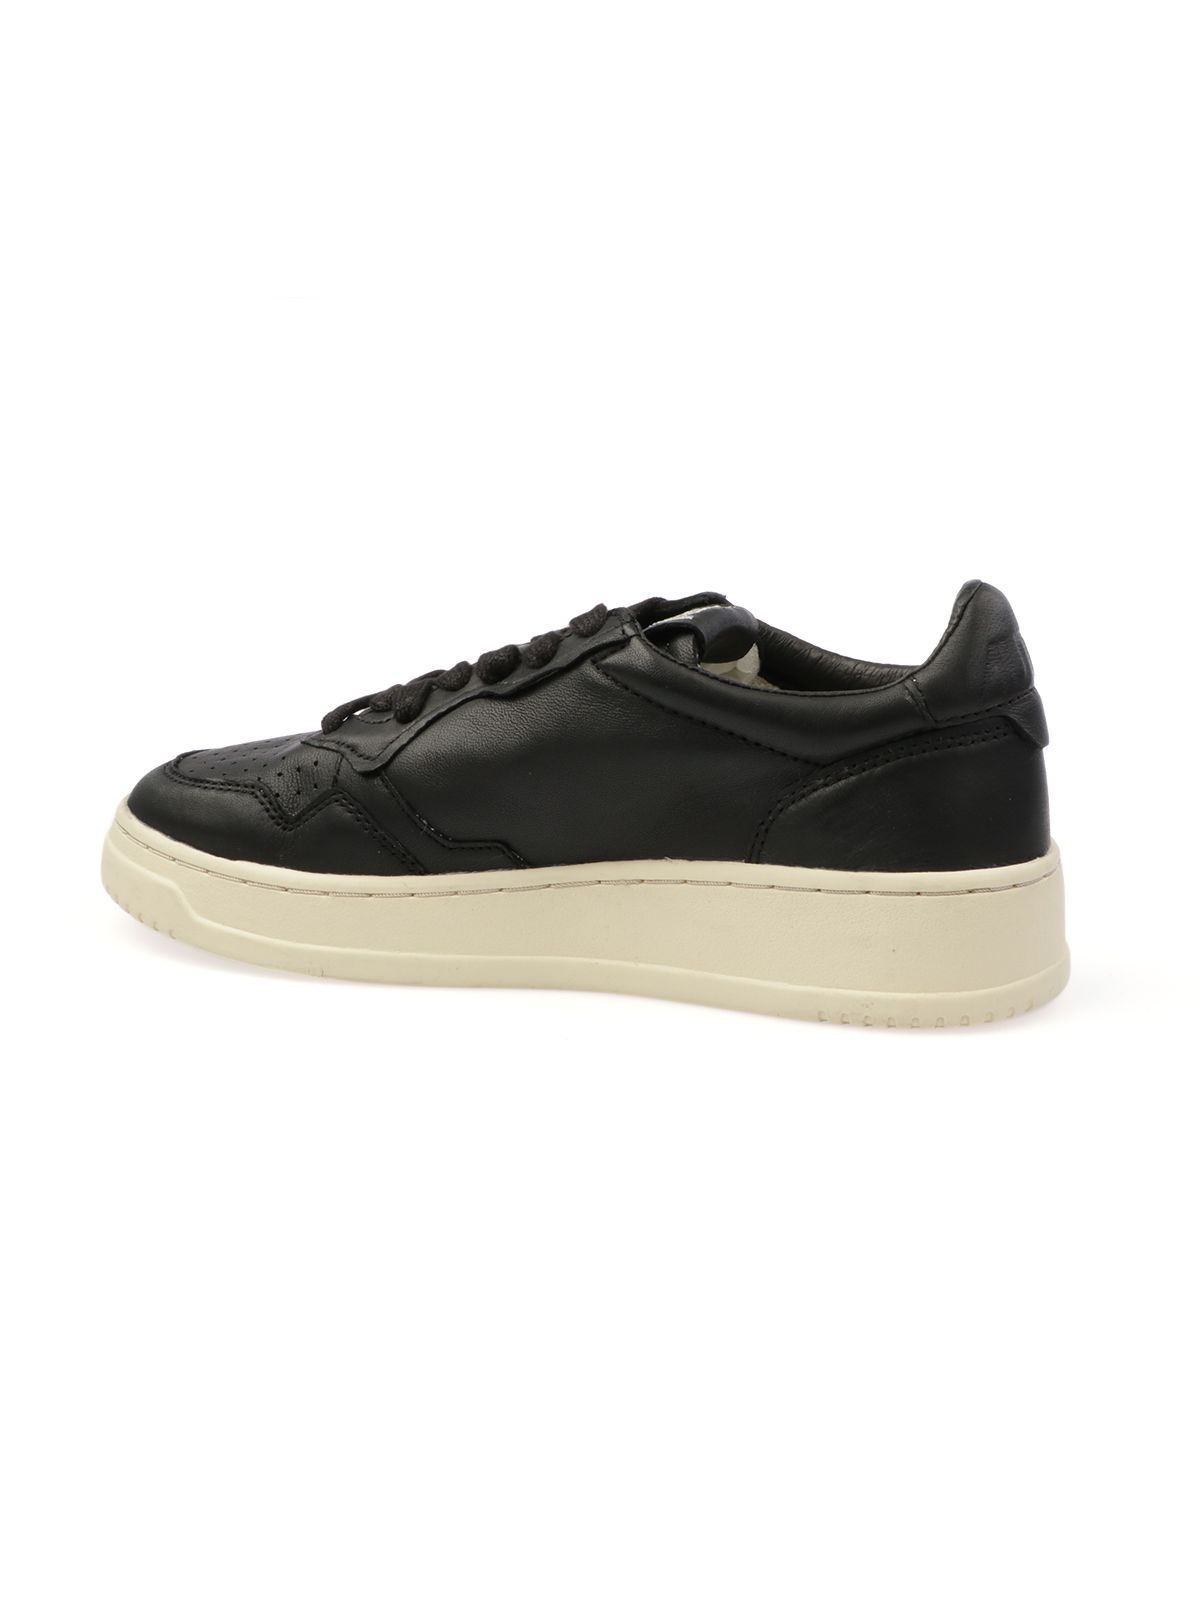 Picture of Autry | Footwear Autry 01 Low